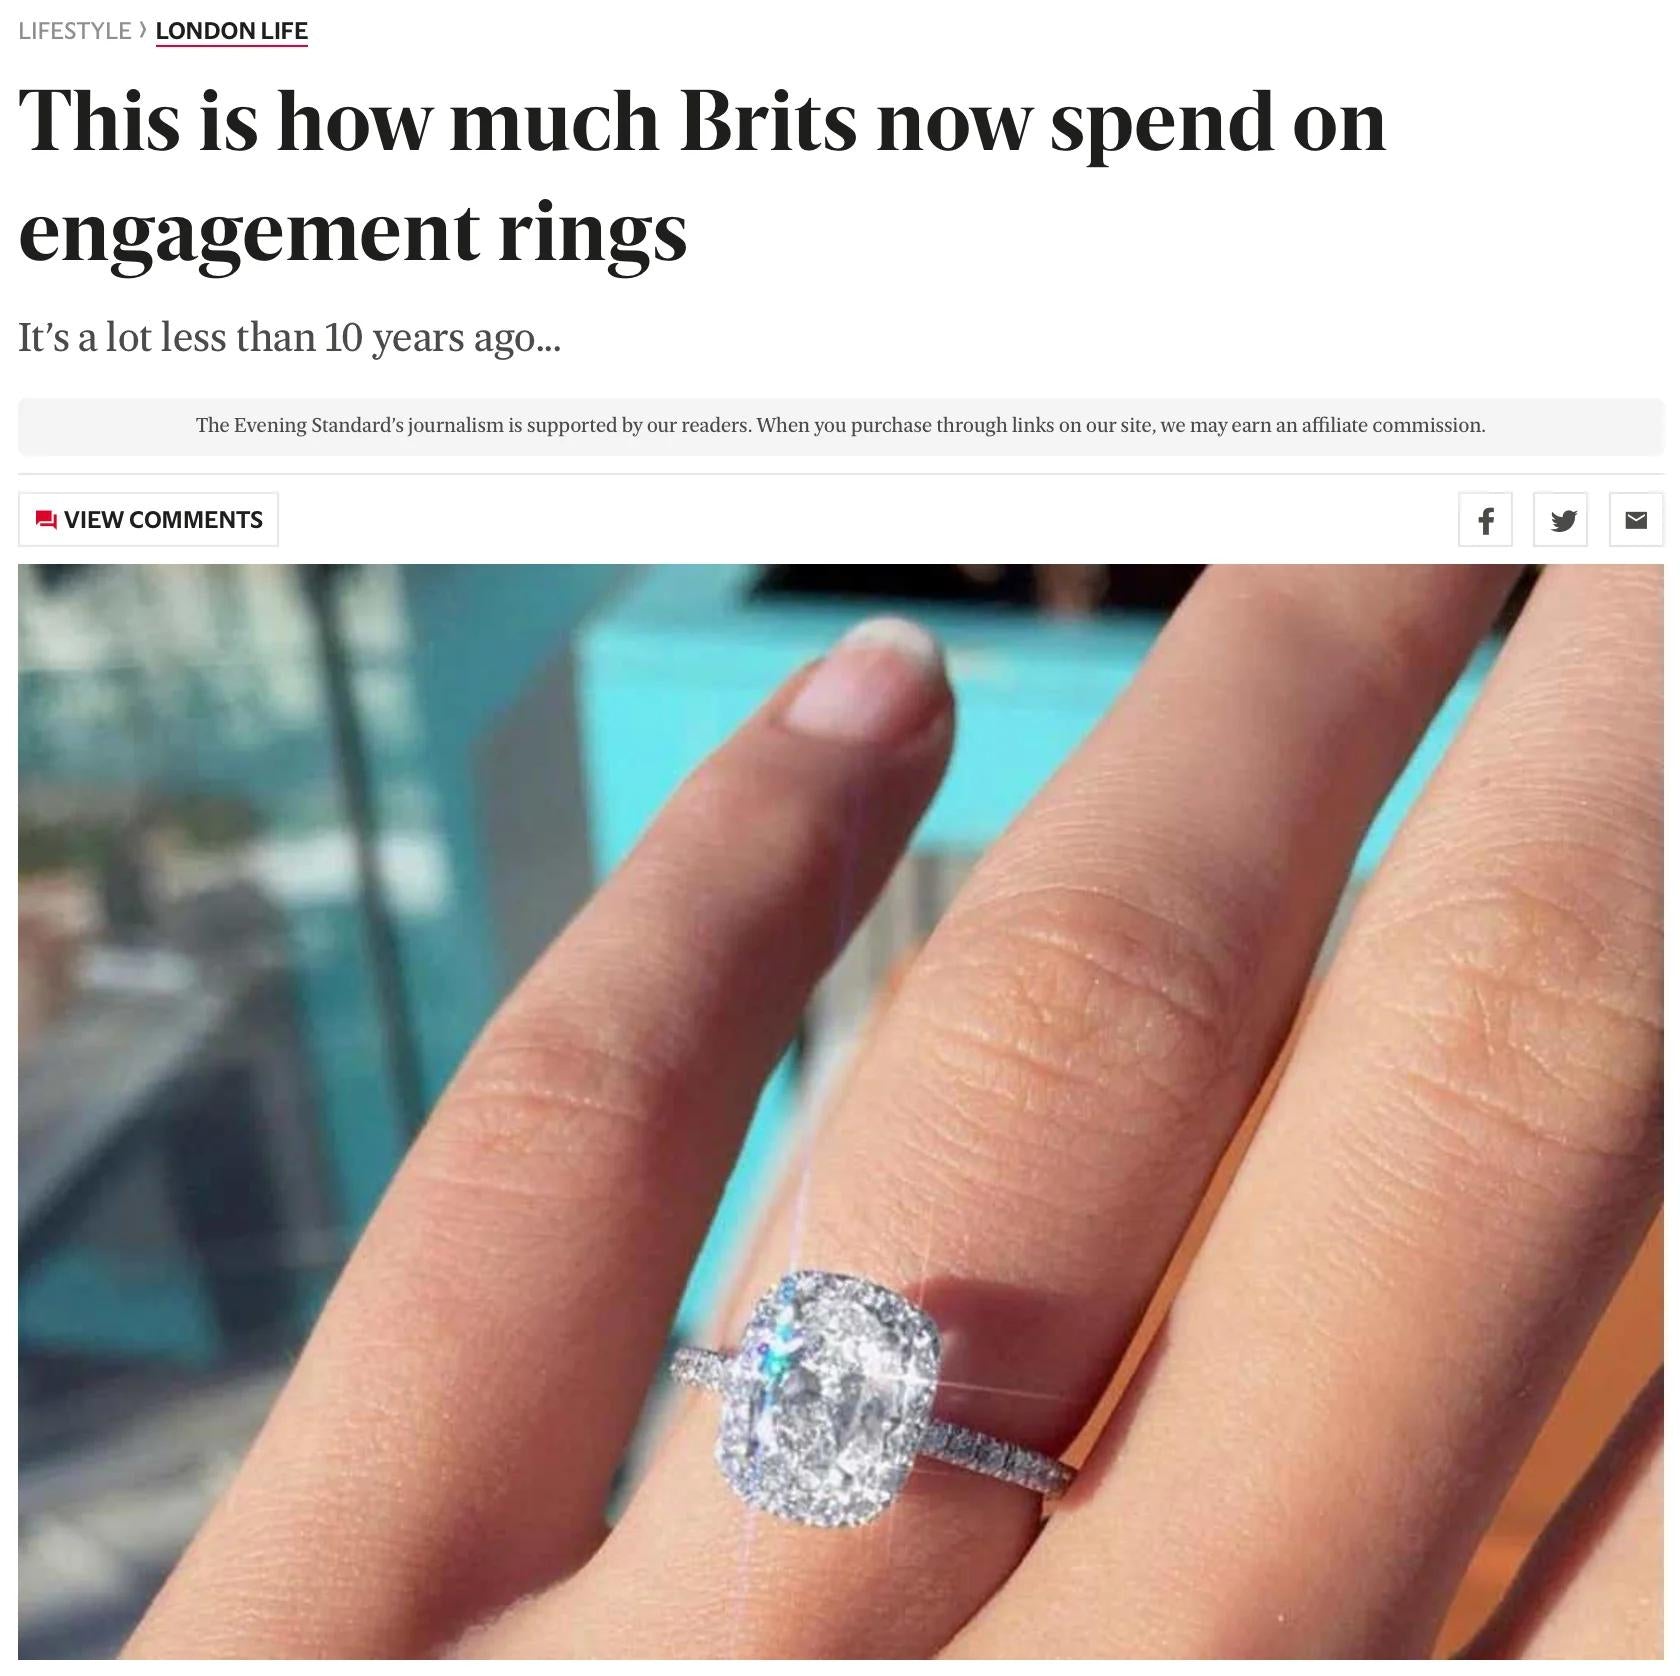 How much is a diamond engagement ring?